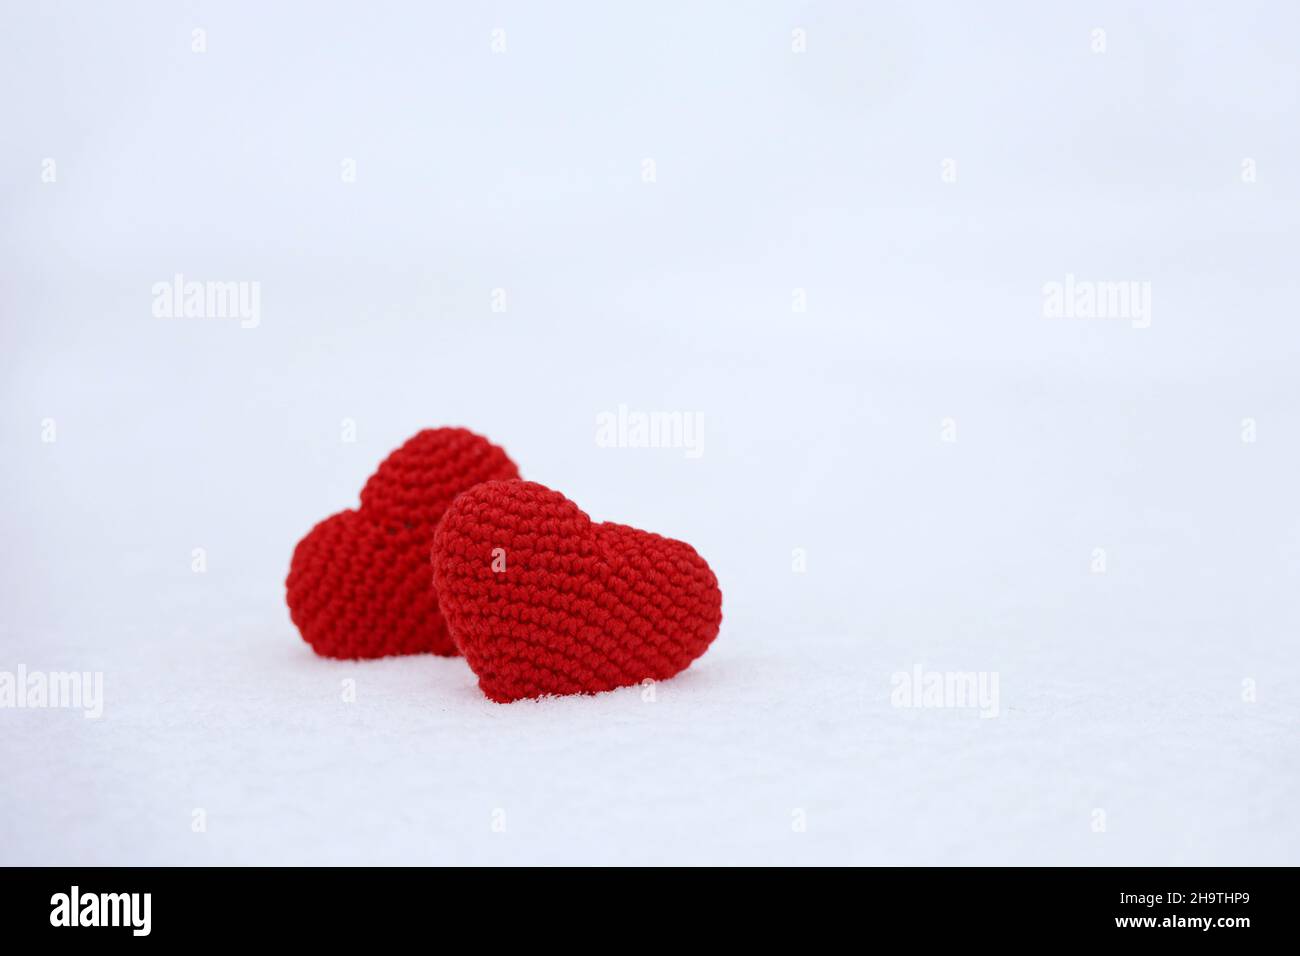 Love hearts in the snow, winter nature. Valentine's card, two knitted red symbols of love, background for romantic event, Christmas celebration Stock Photo